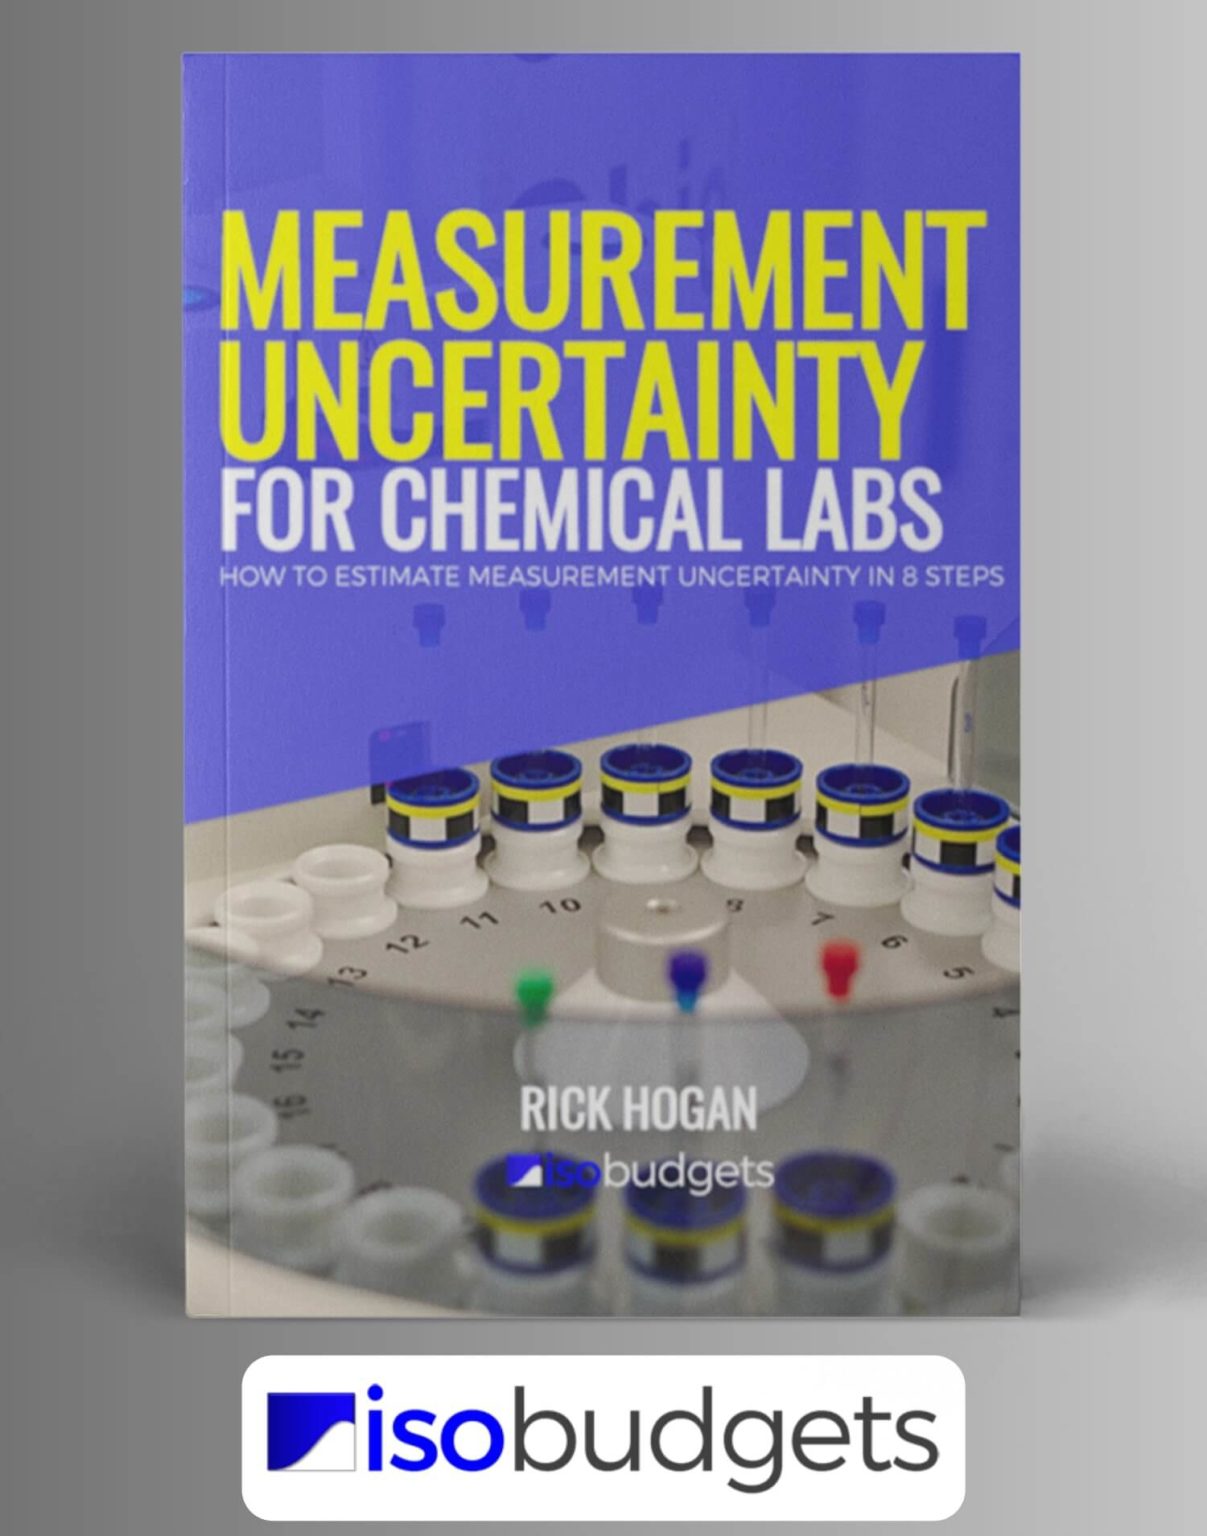 How To Calculate Measurement Uncertainty In Chemistry Isobudgets